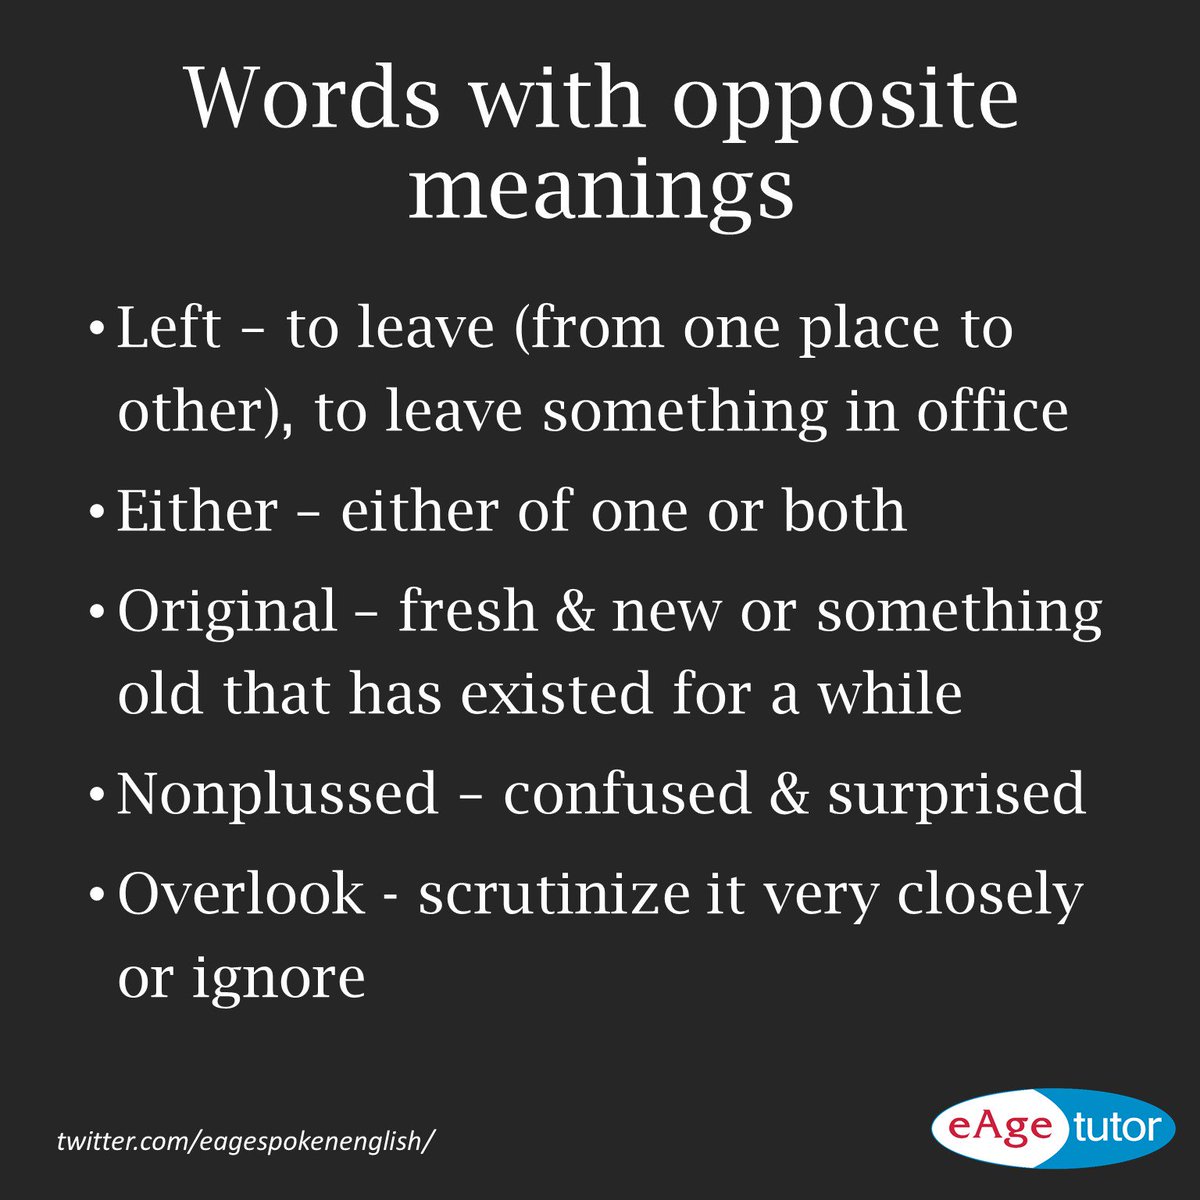 Eage Spoken English On Twitter English Words May Not Mean The Same Way It Seems To Be It Can Also Have An Opposite Meaning Learn Opposite Meanings Https T Co Lud0uxxuue Https T Co Ucaypnshpo